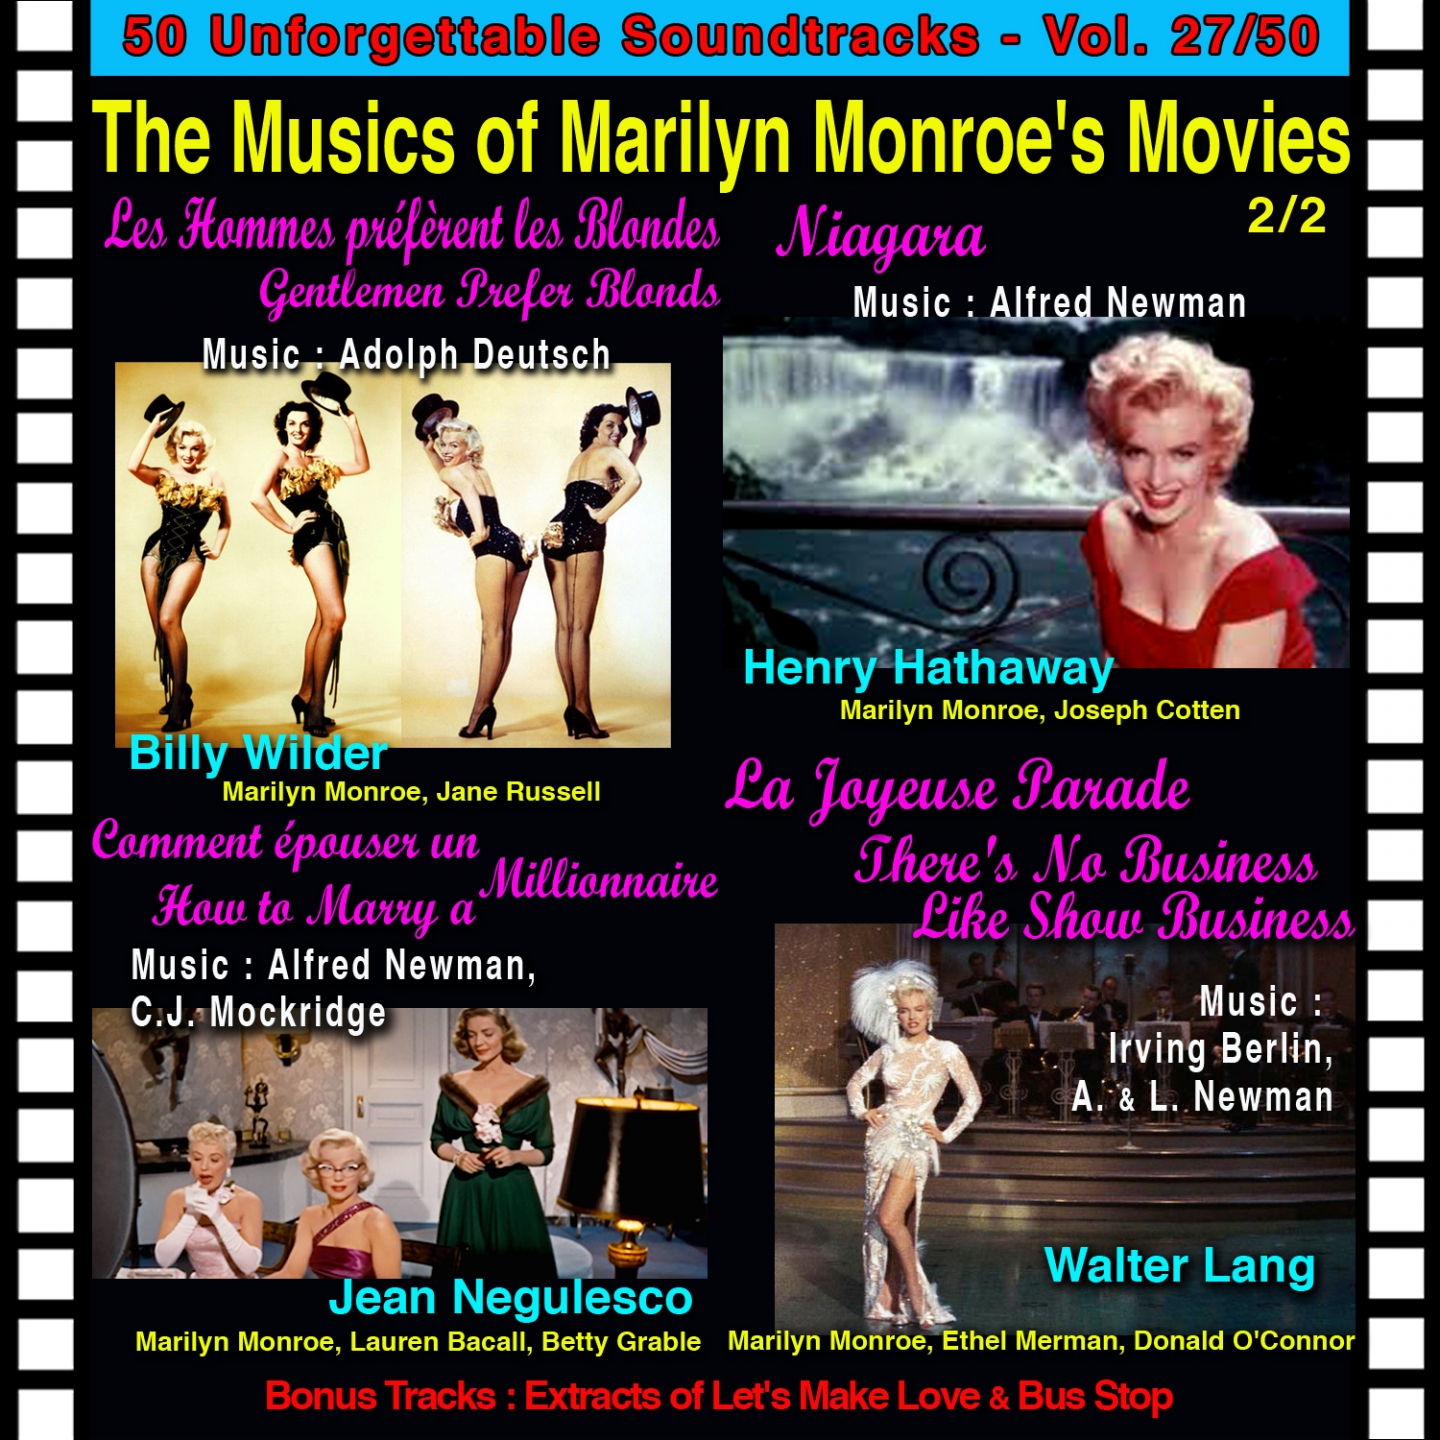 La Joyeuse Parade / There's No Business Like Show Business: Heatwave (Marilyn Music Movies (2 / 2))